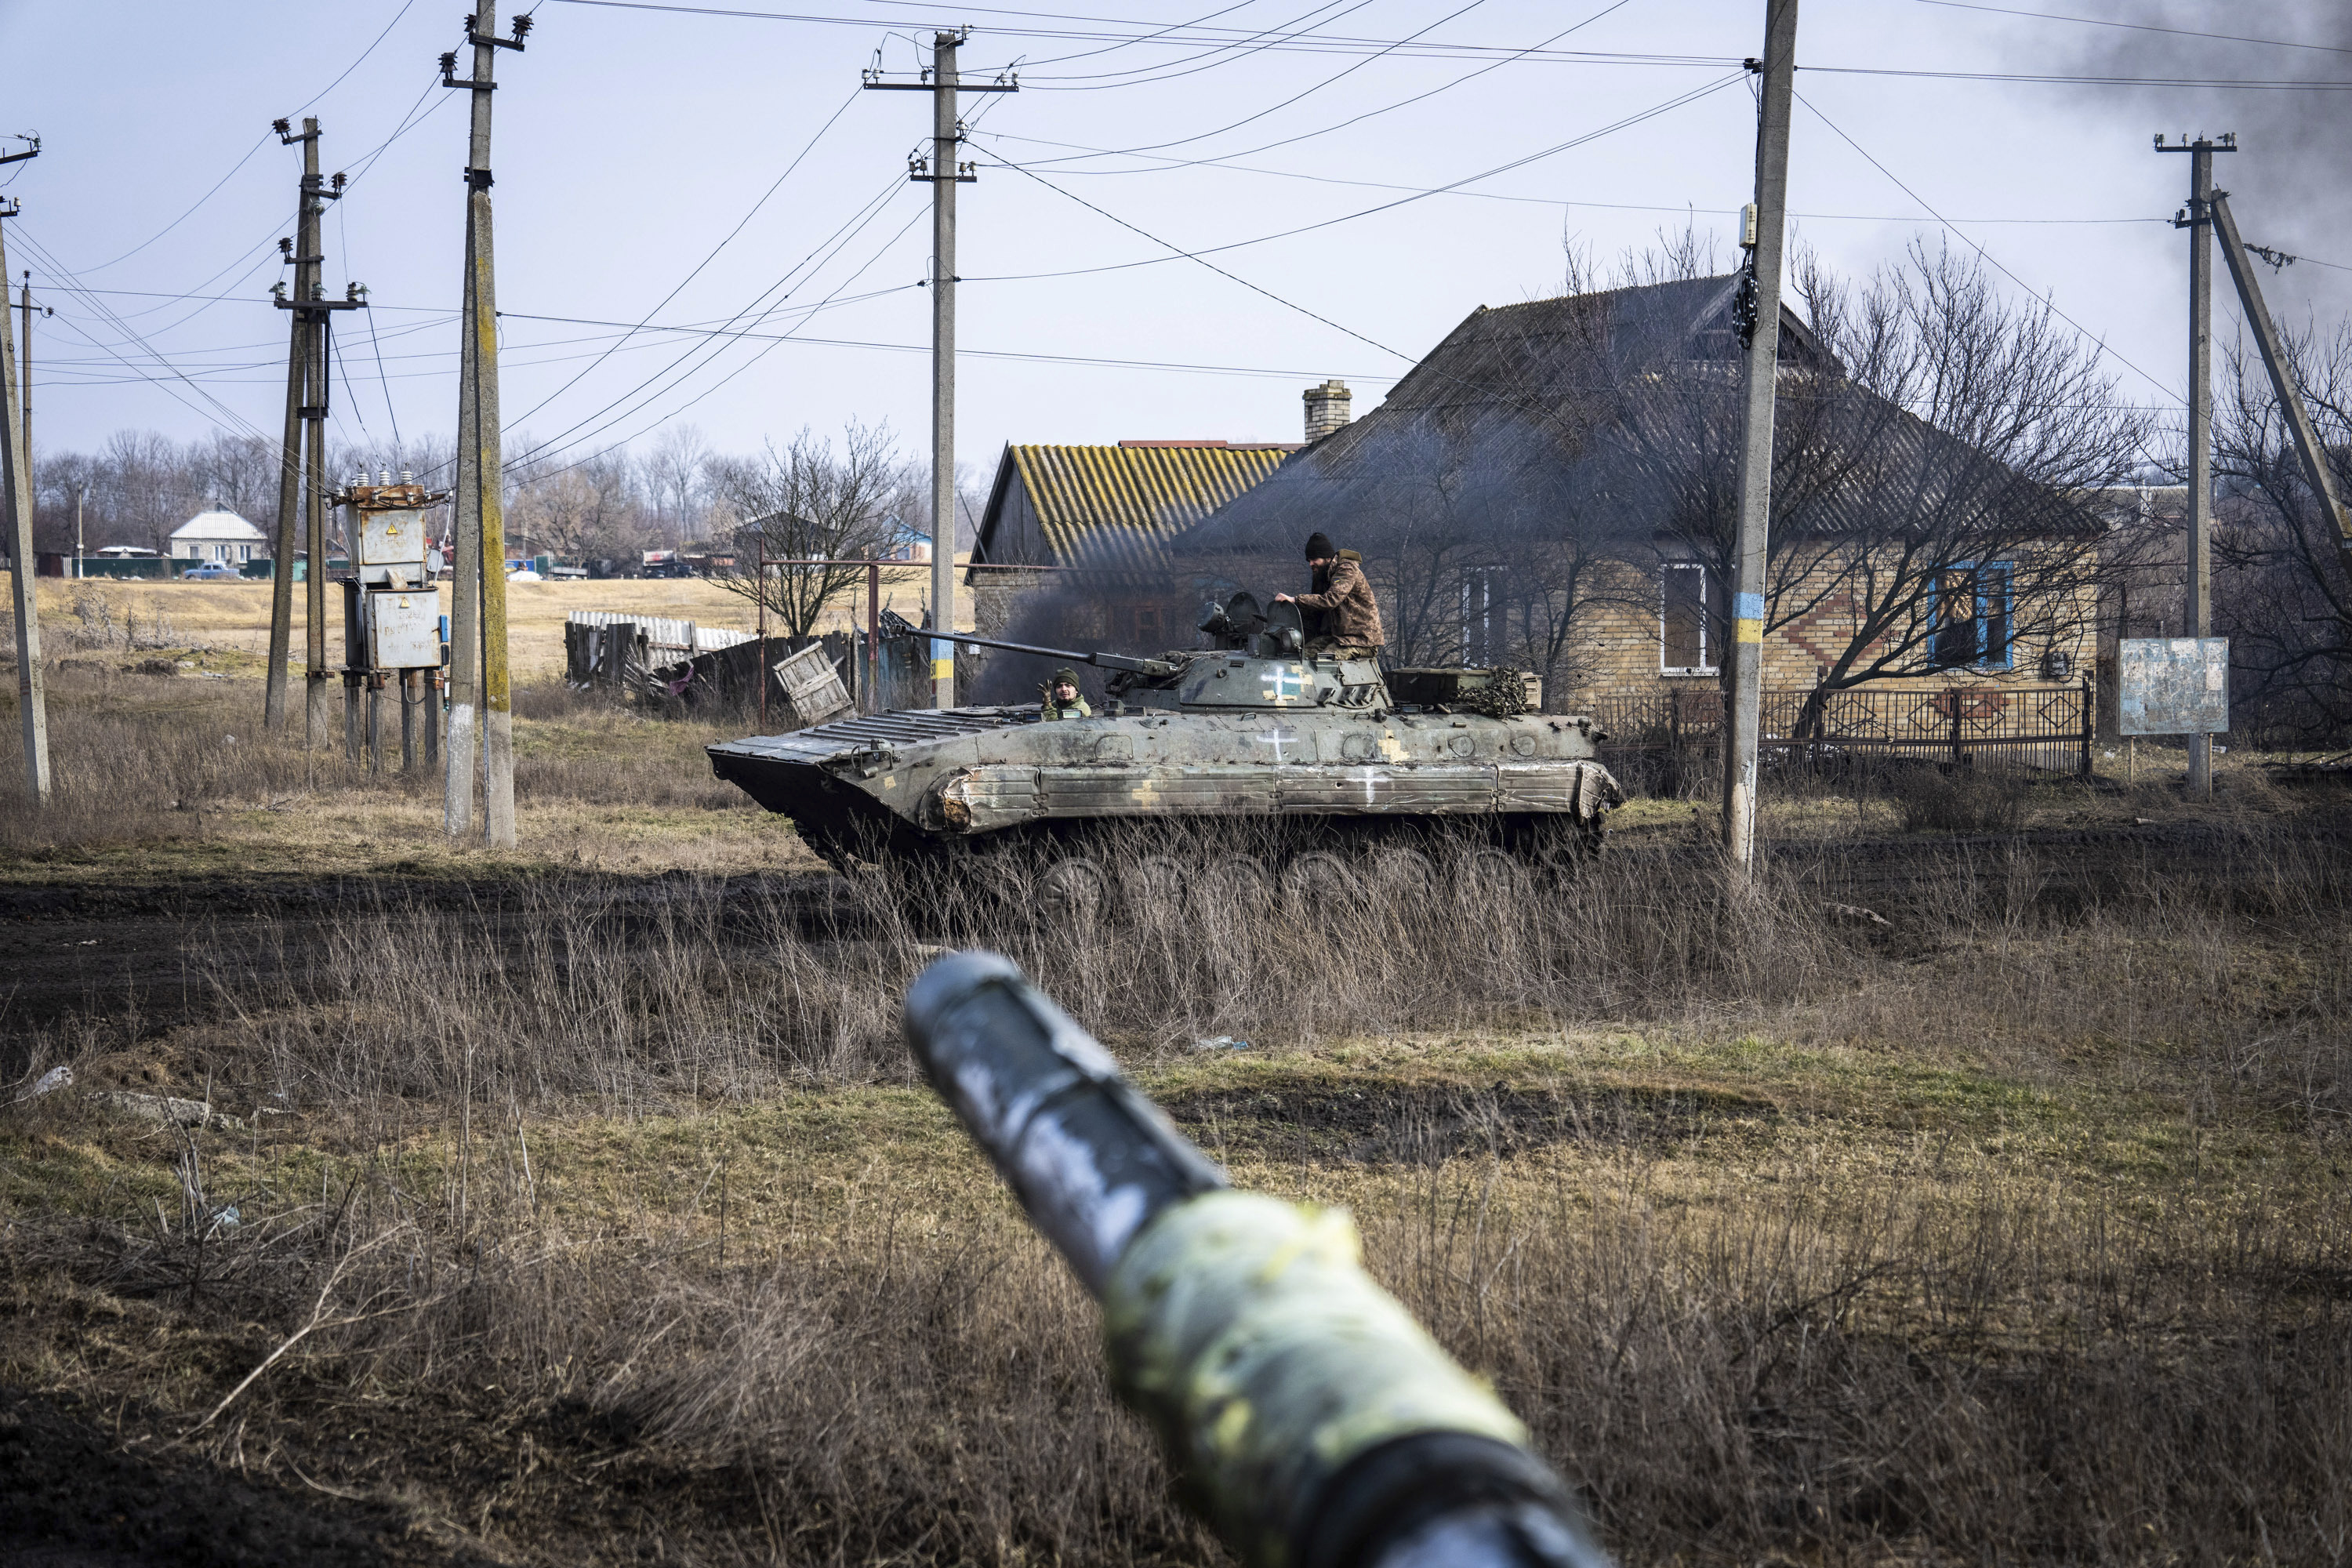 A BMP-1 armed personnel carrier seen from a tank, in Donbas on March 7.